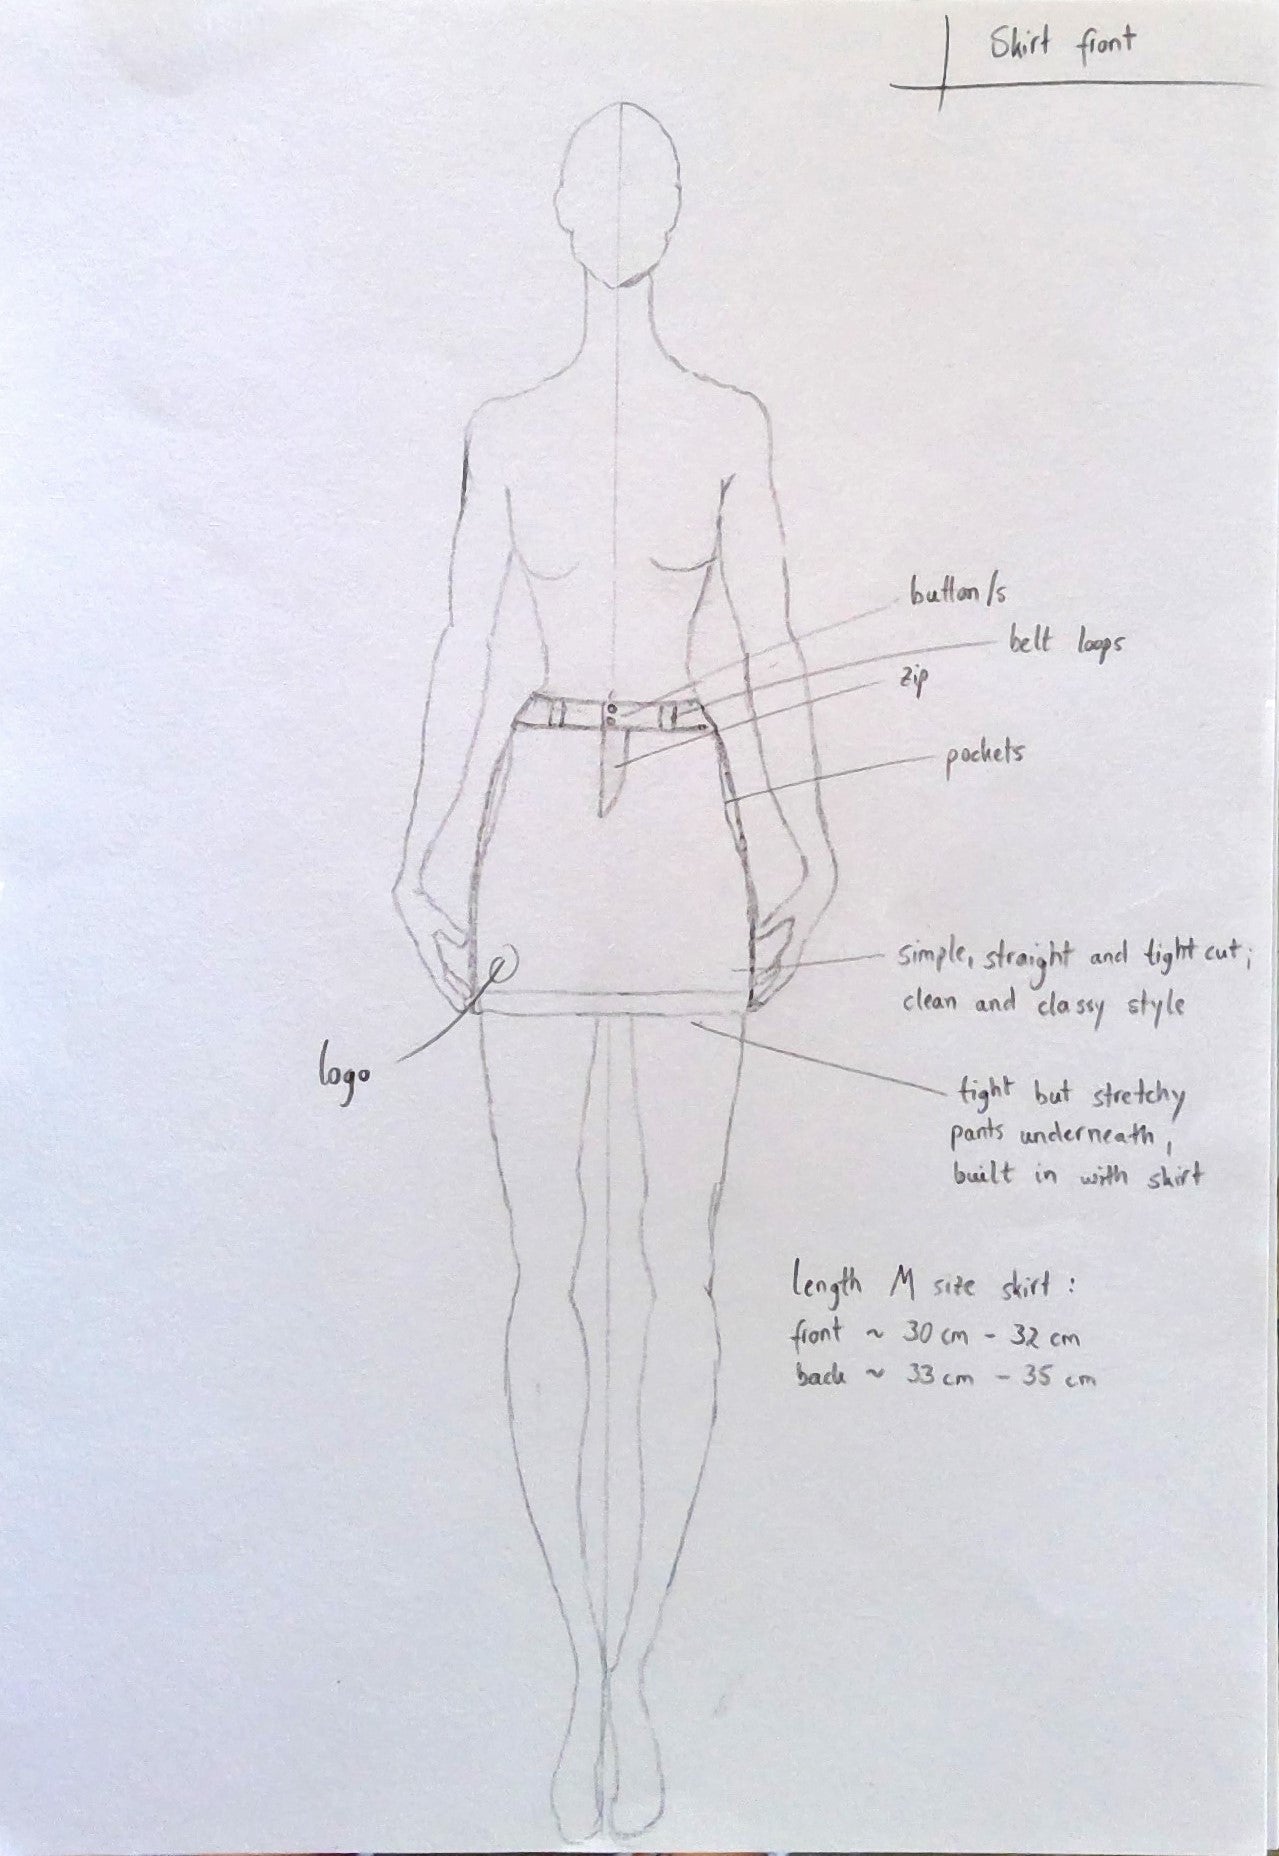 Image of the first sketch of the Ocean Meets Green Tide skirt